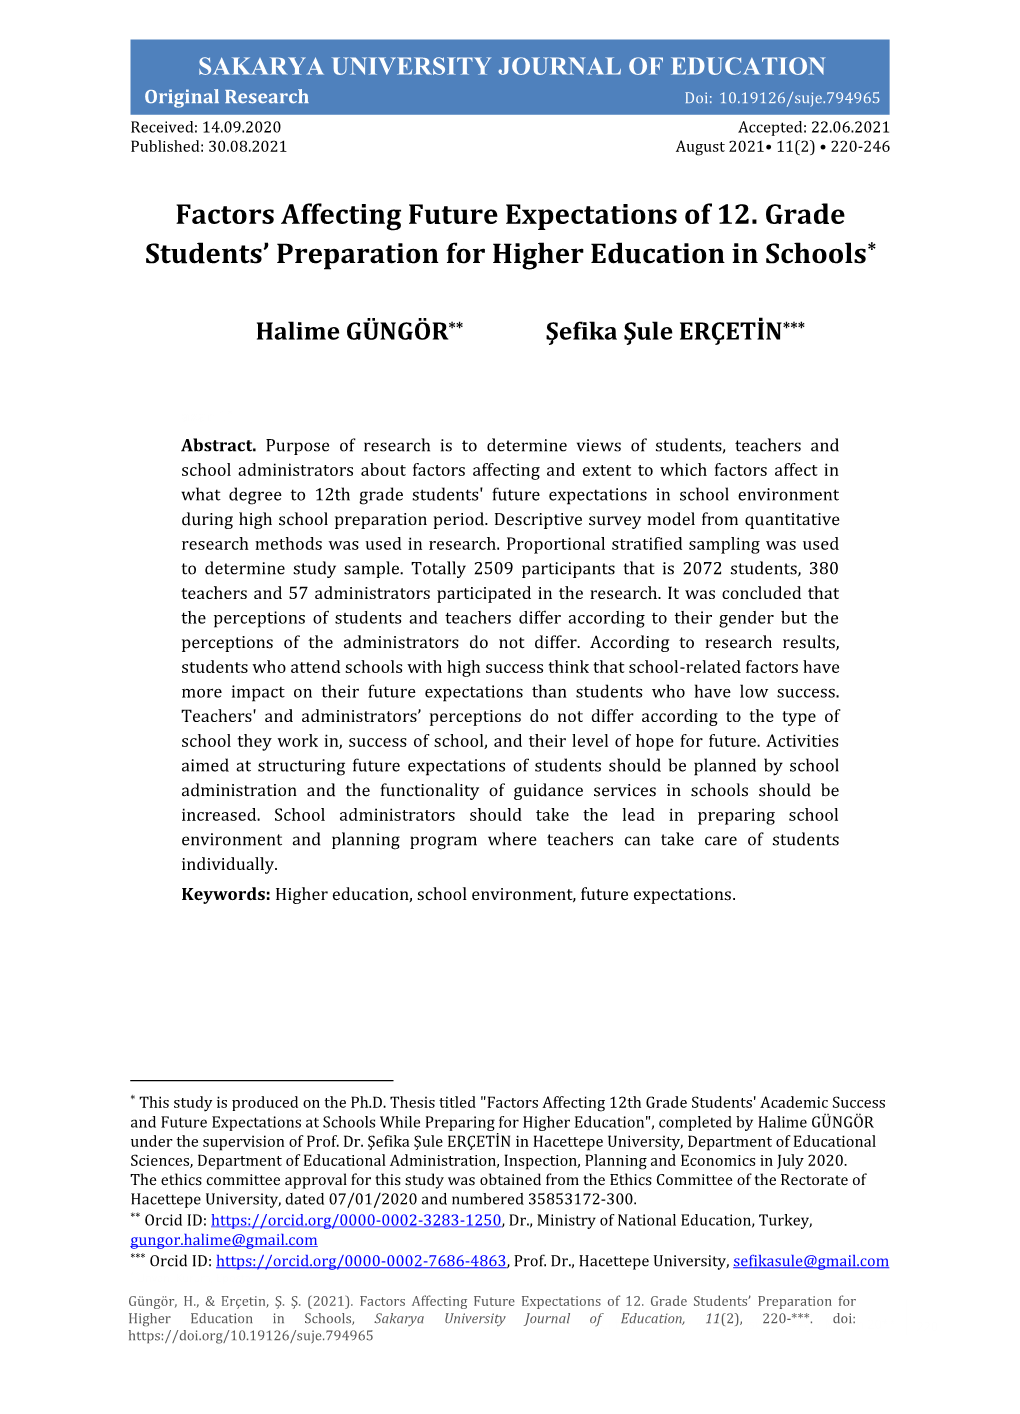 Factors Affecting Future Expectations of 12. Grade Students' Preparation for Higher Education in Schools*